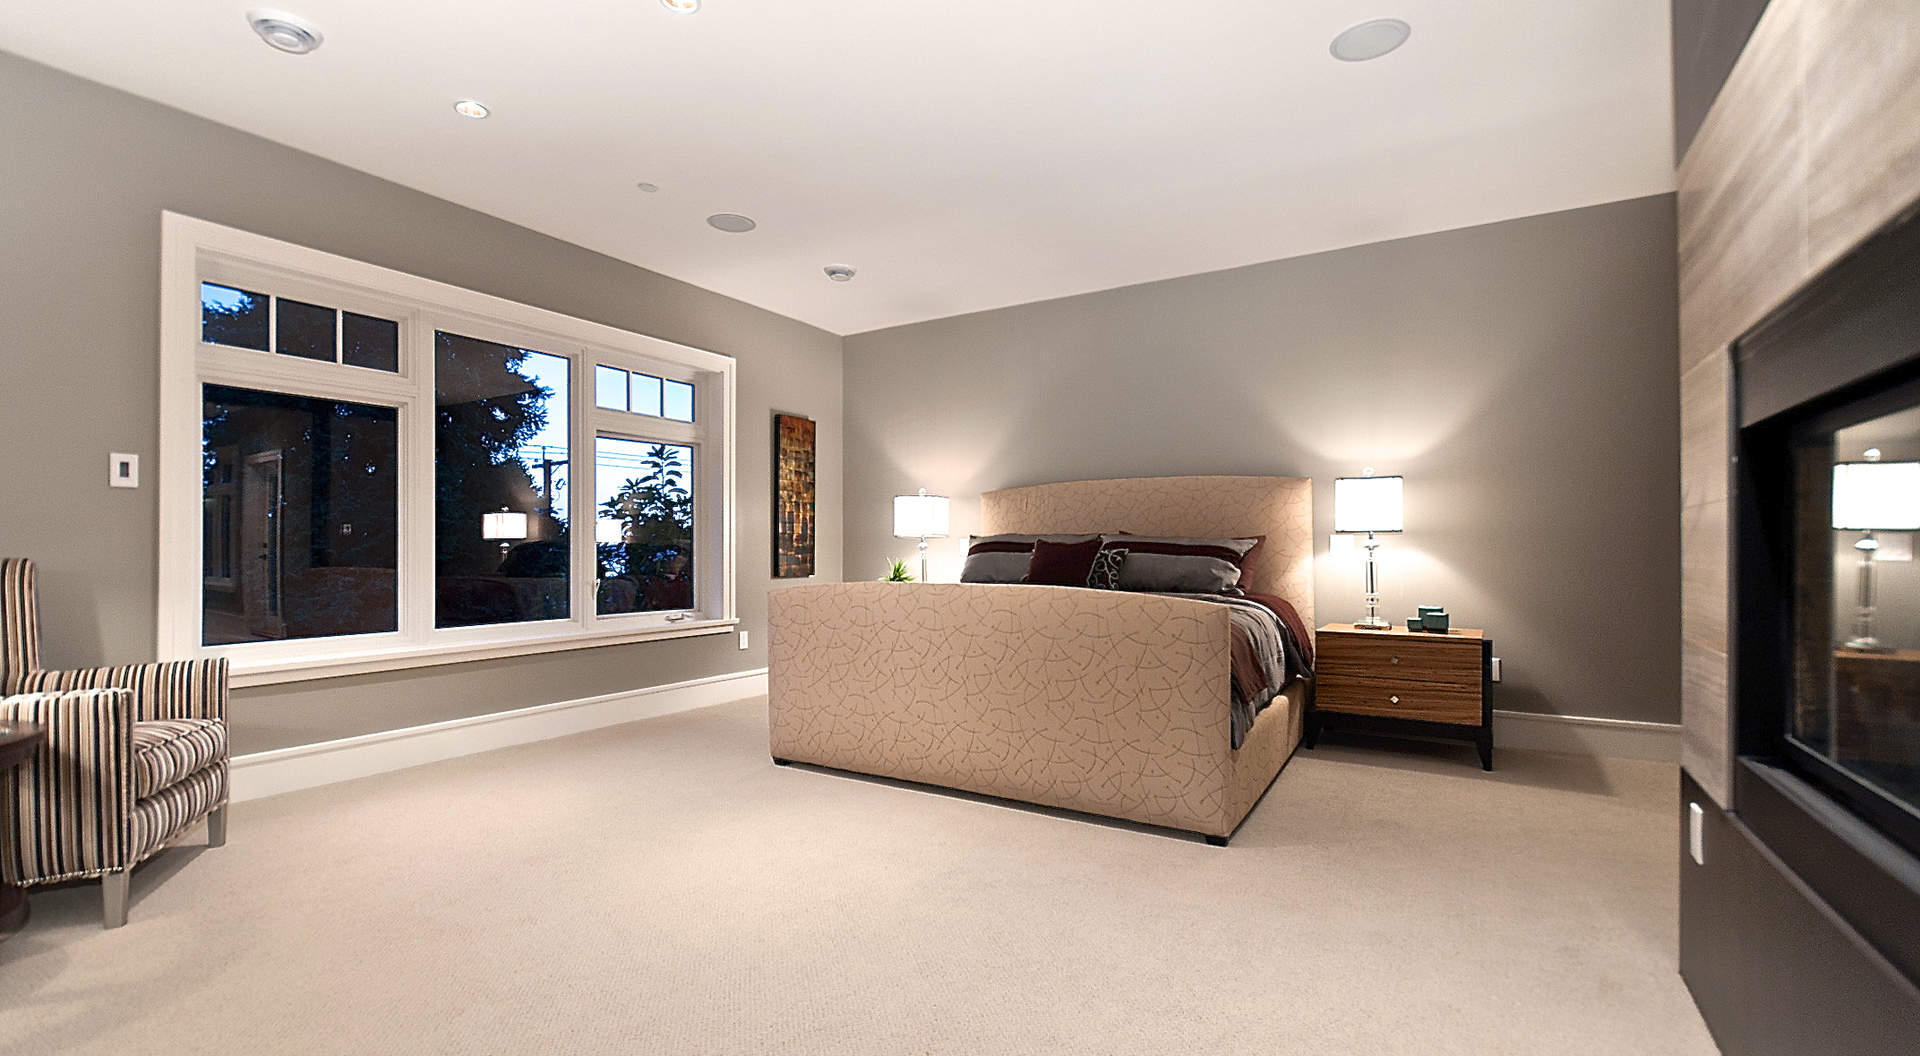 Spacious Master Bedroom with Roaring Fireplace